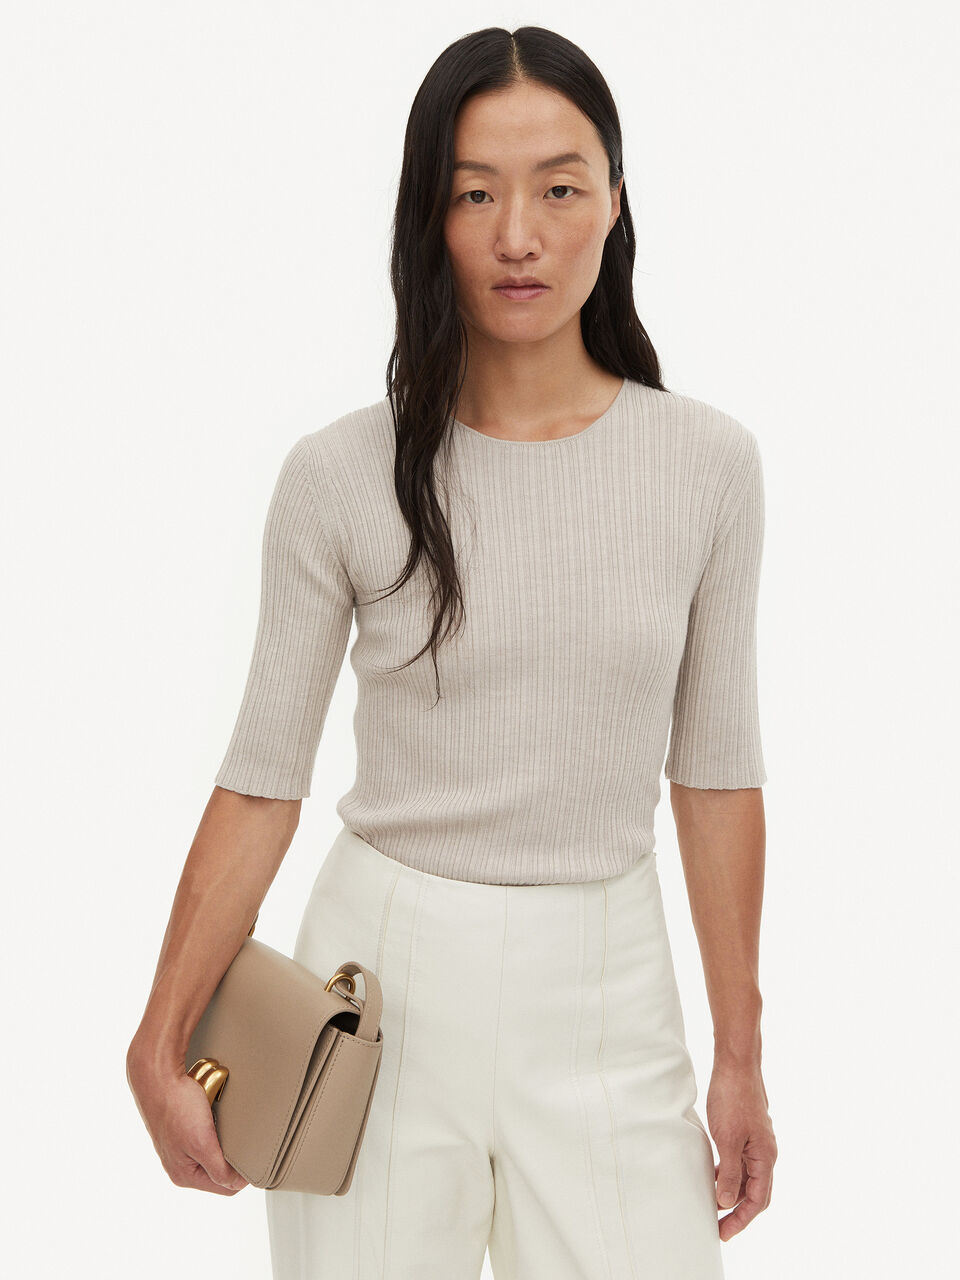 BY MALENE BIRGER - Blaise Pullover in Yellow Sand